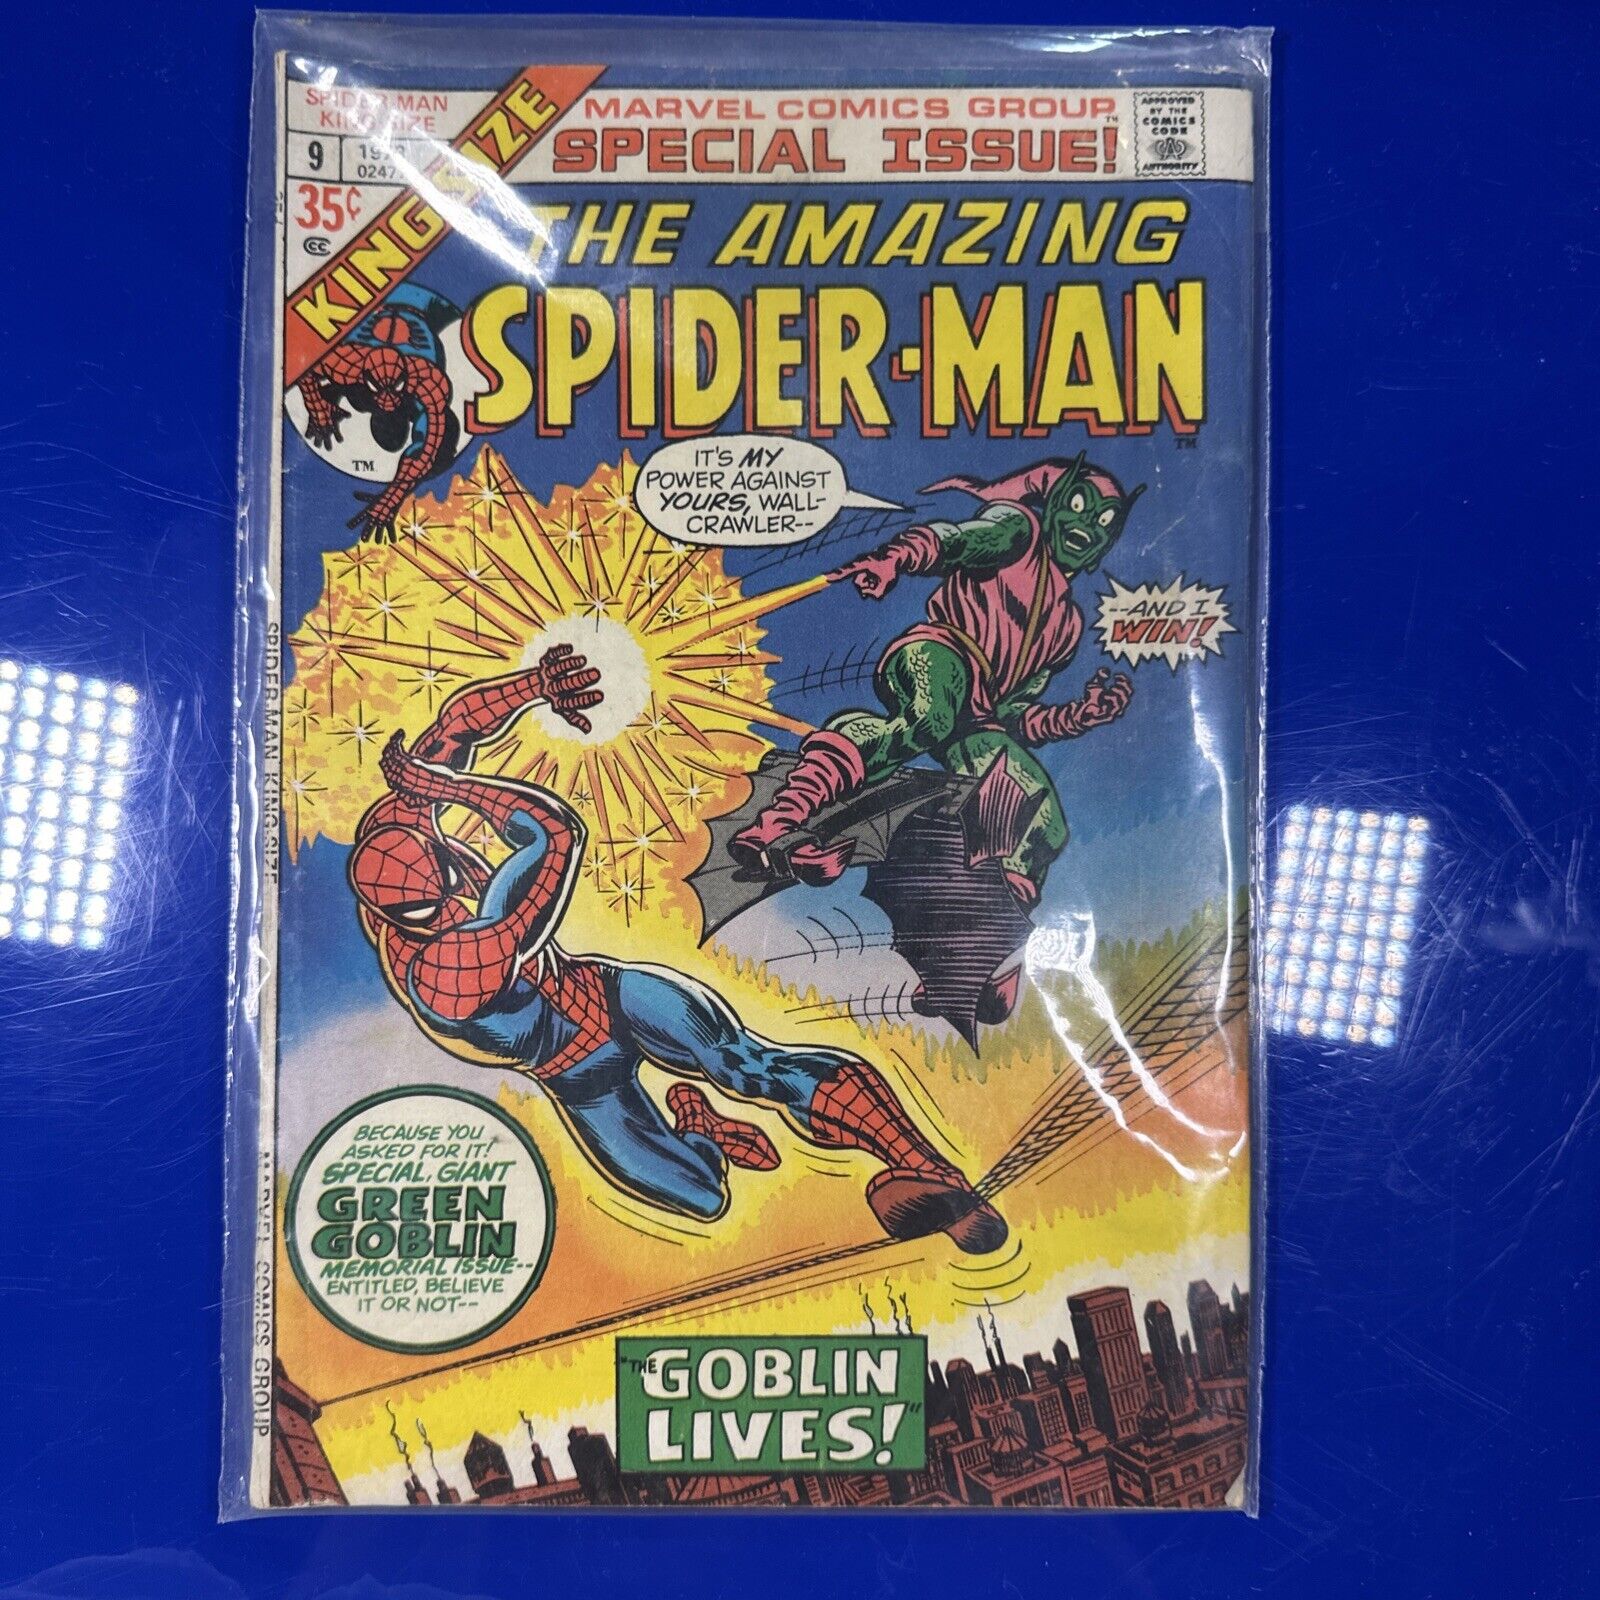 King-Size Special: The Amazing Spider-Man #9 - The Goblin Lives | 1973 | Marvel